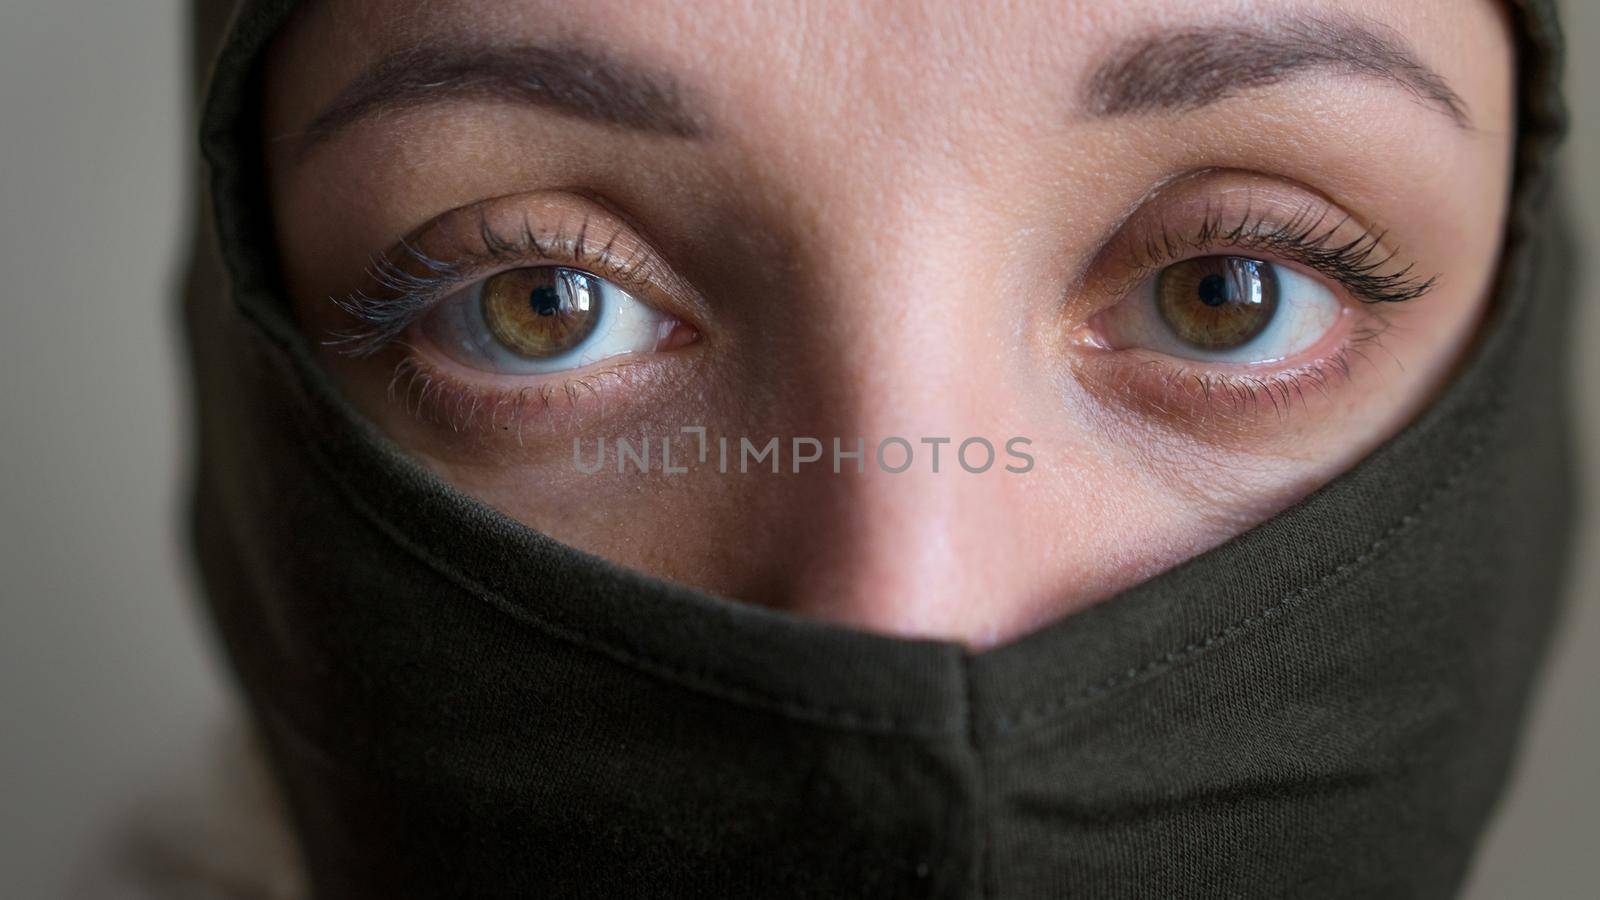 Female portrait of young girl wearing khaki balaclava, only eyes are visible, mandatory conscription, military, feminism, equality concept by balinska_lv